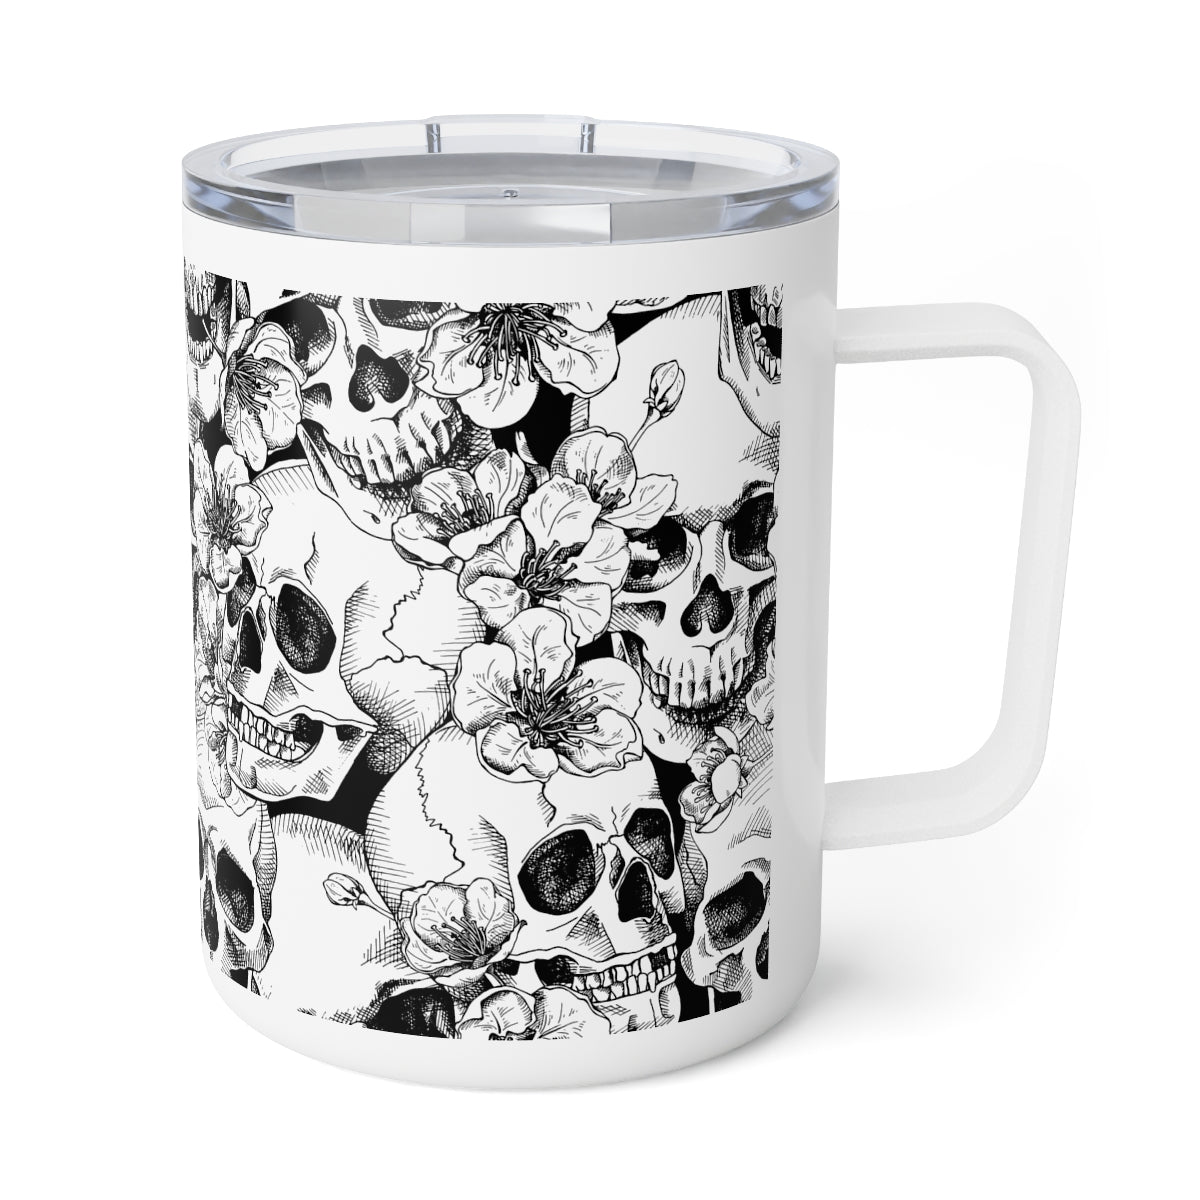 Abstract Flowers Insulated Coffee Mug, 10oz Stainless Steel Travel